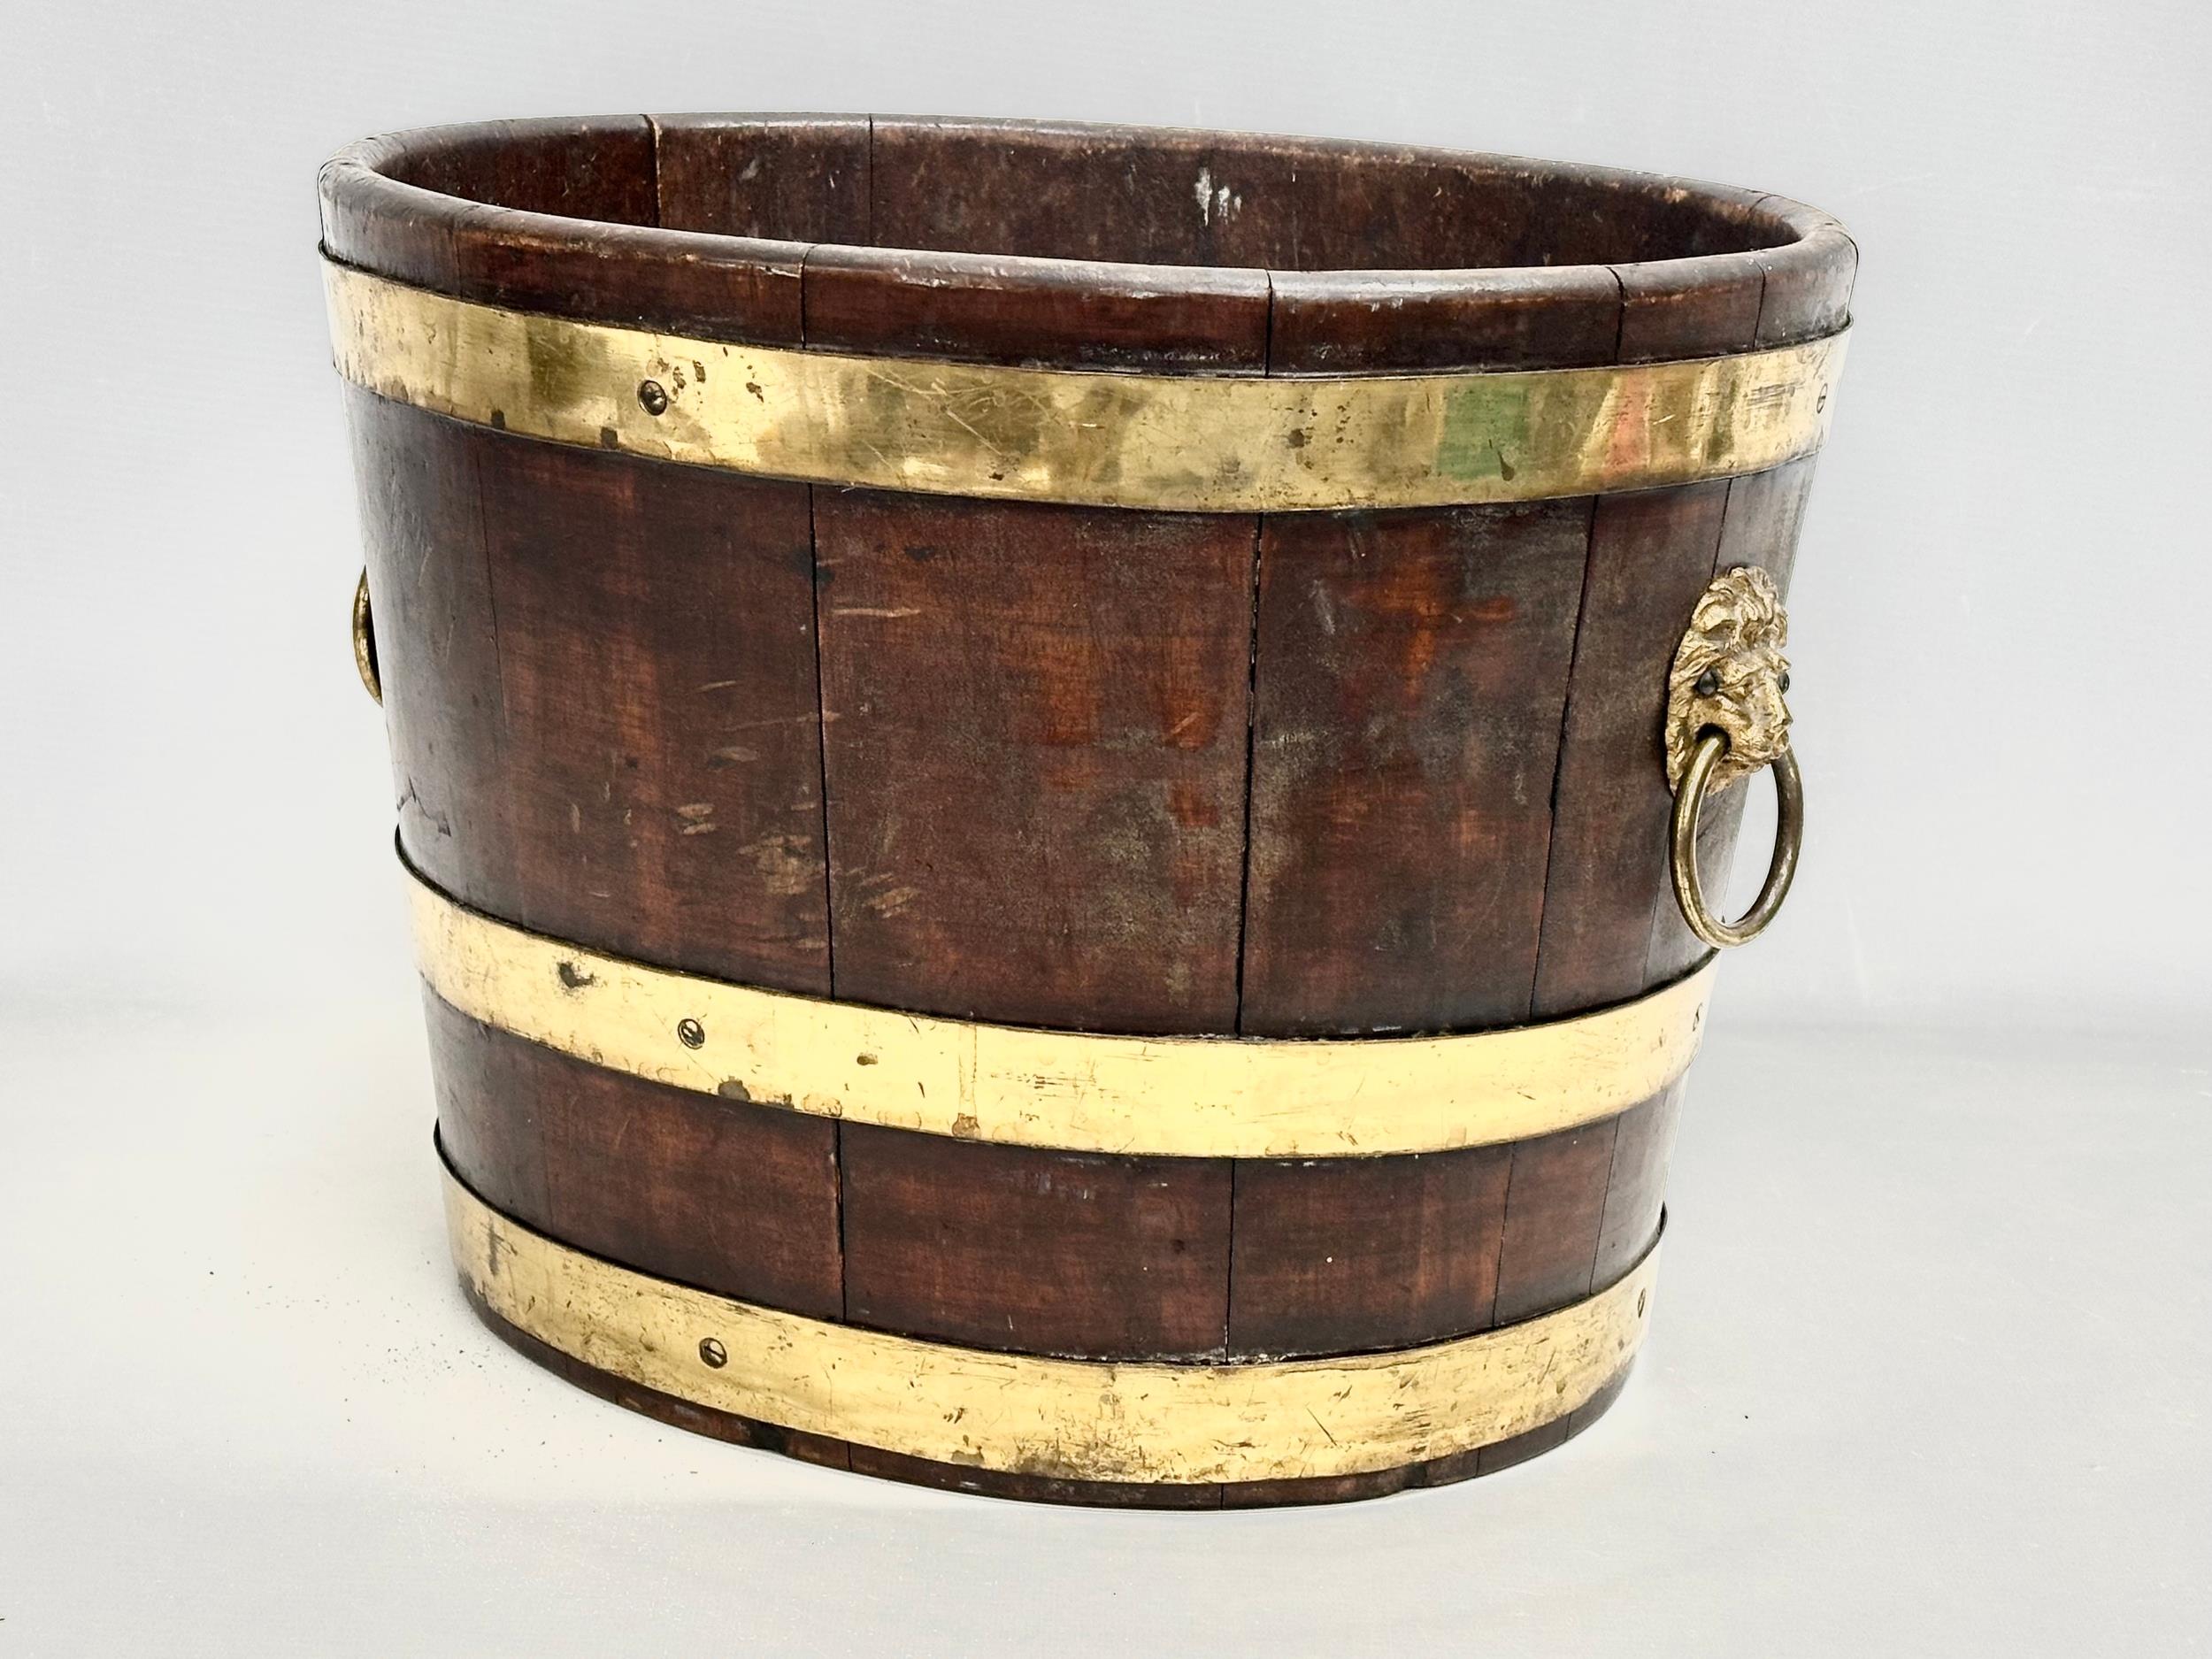 A George III brass bound wine cooler with lion ring handles and original liner. Circa 1780-1790. - Image 2 of 3